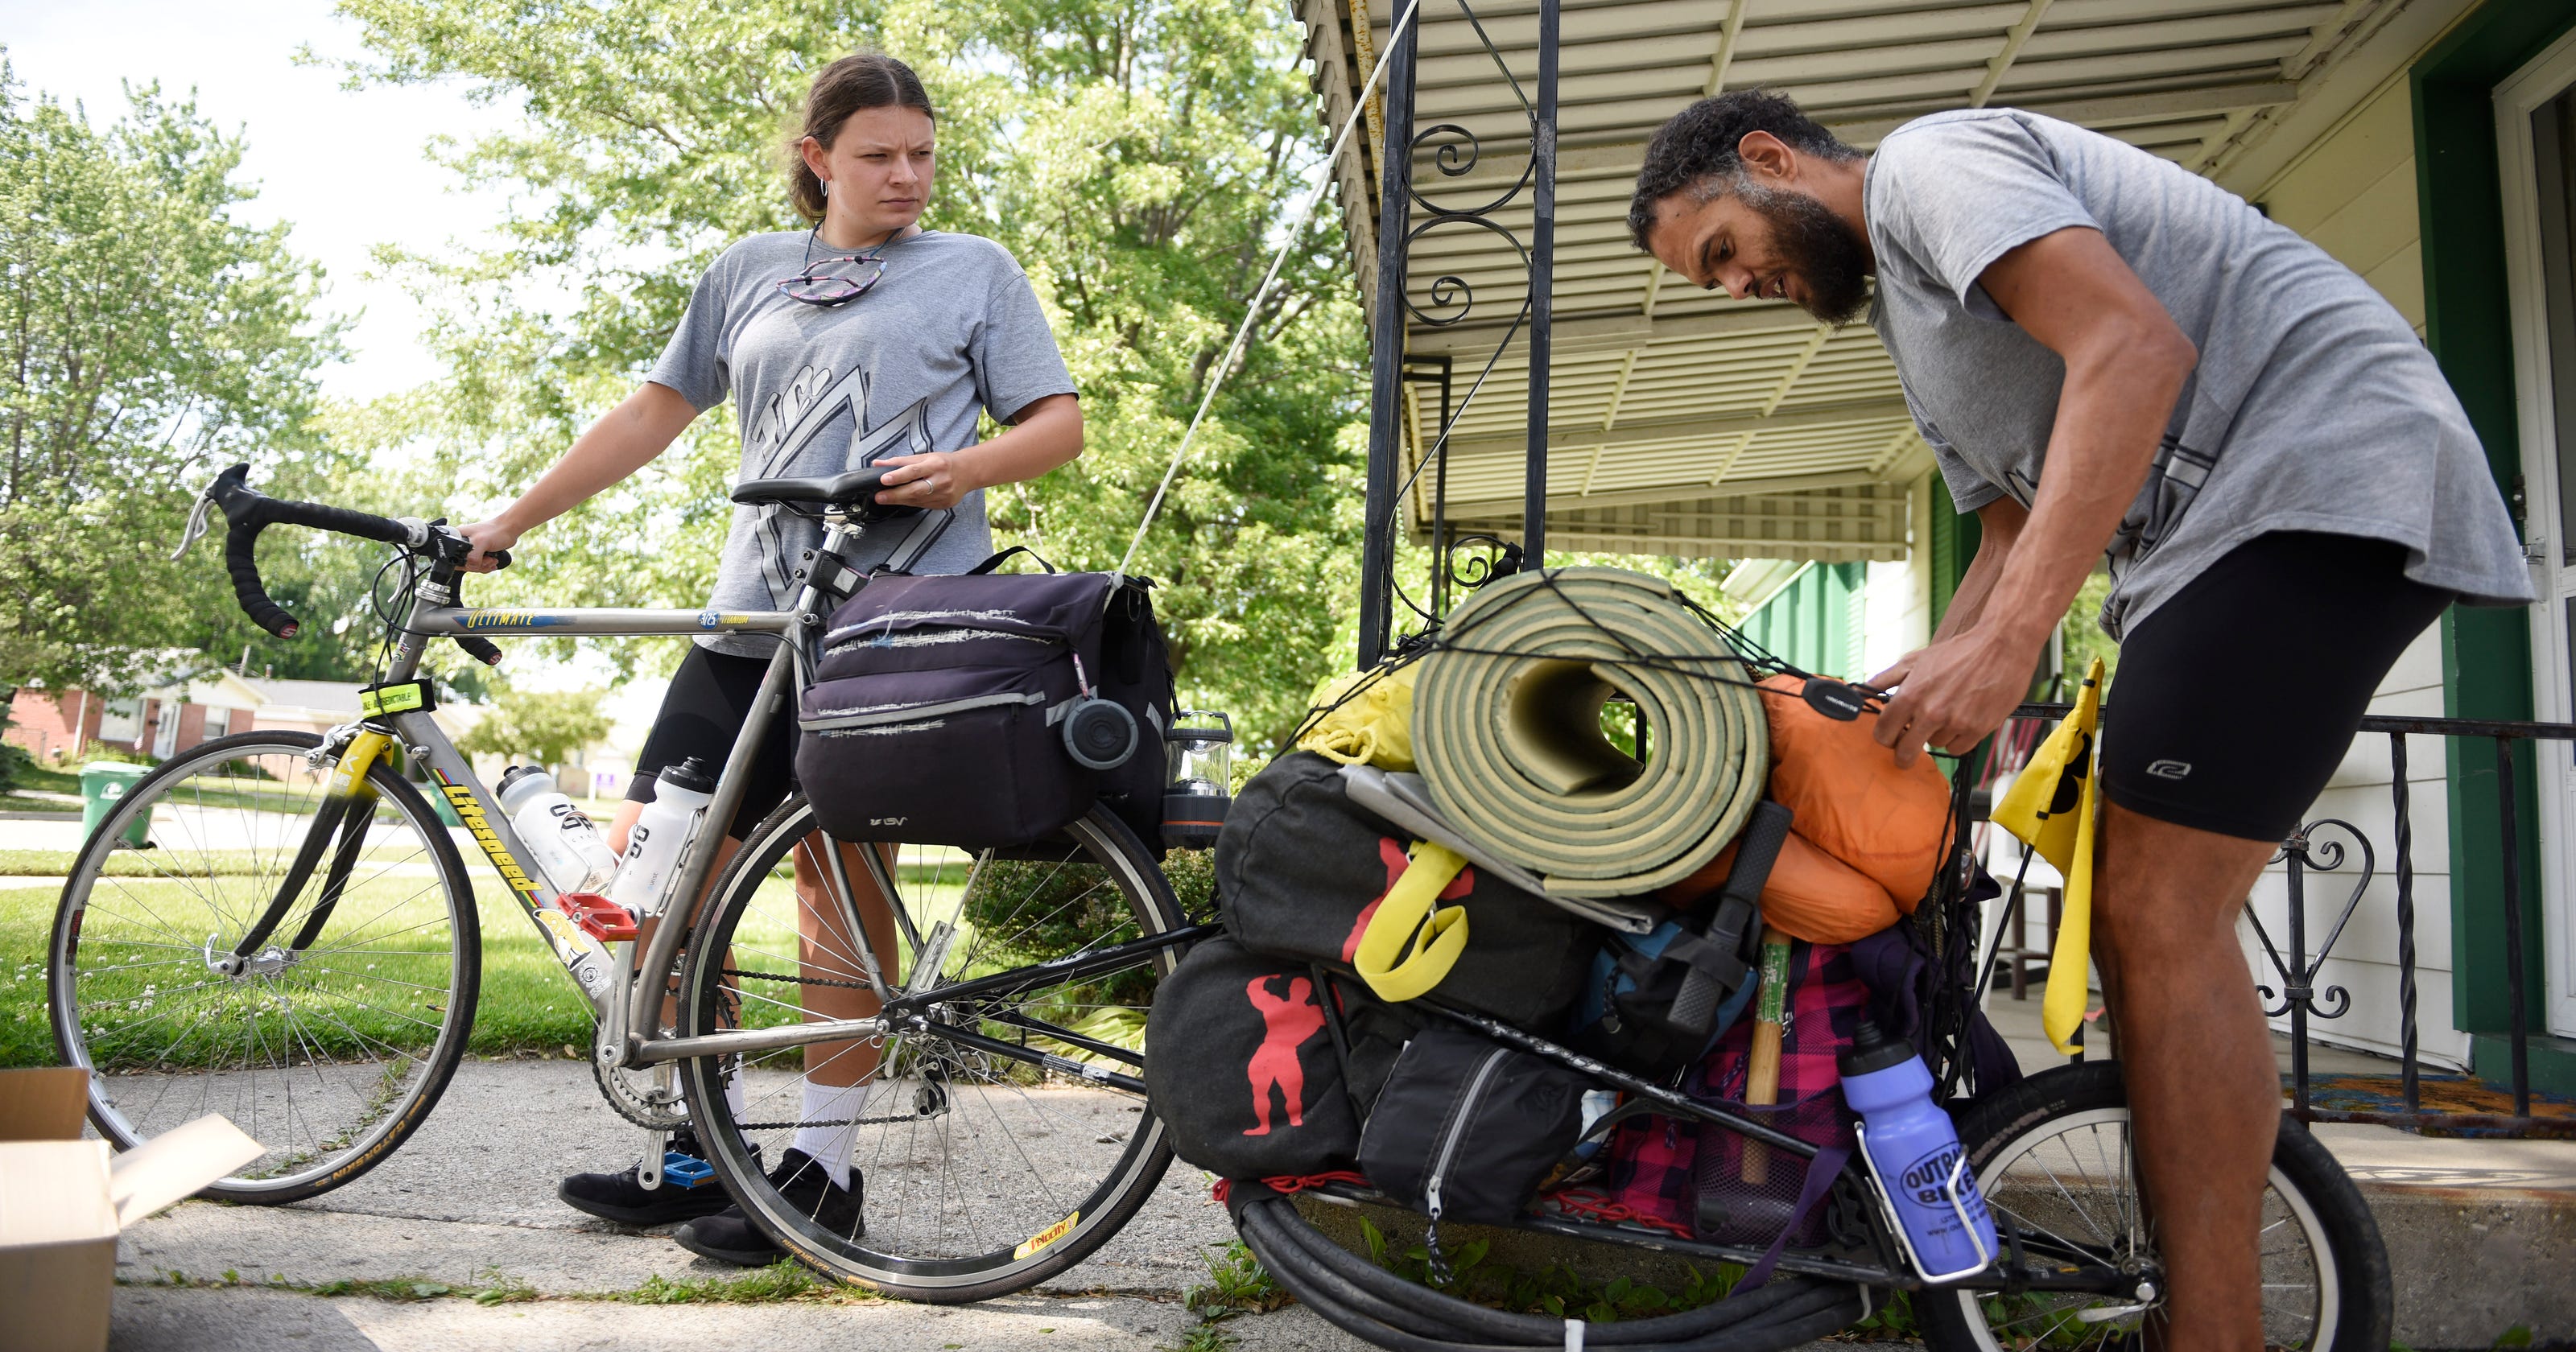 Couple Finds Kindness Key In Cross Country Bike Ride